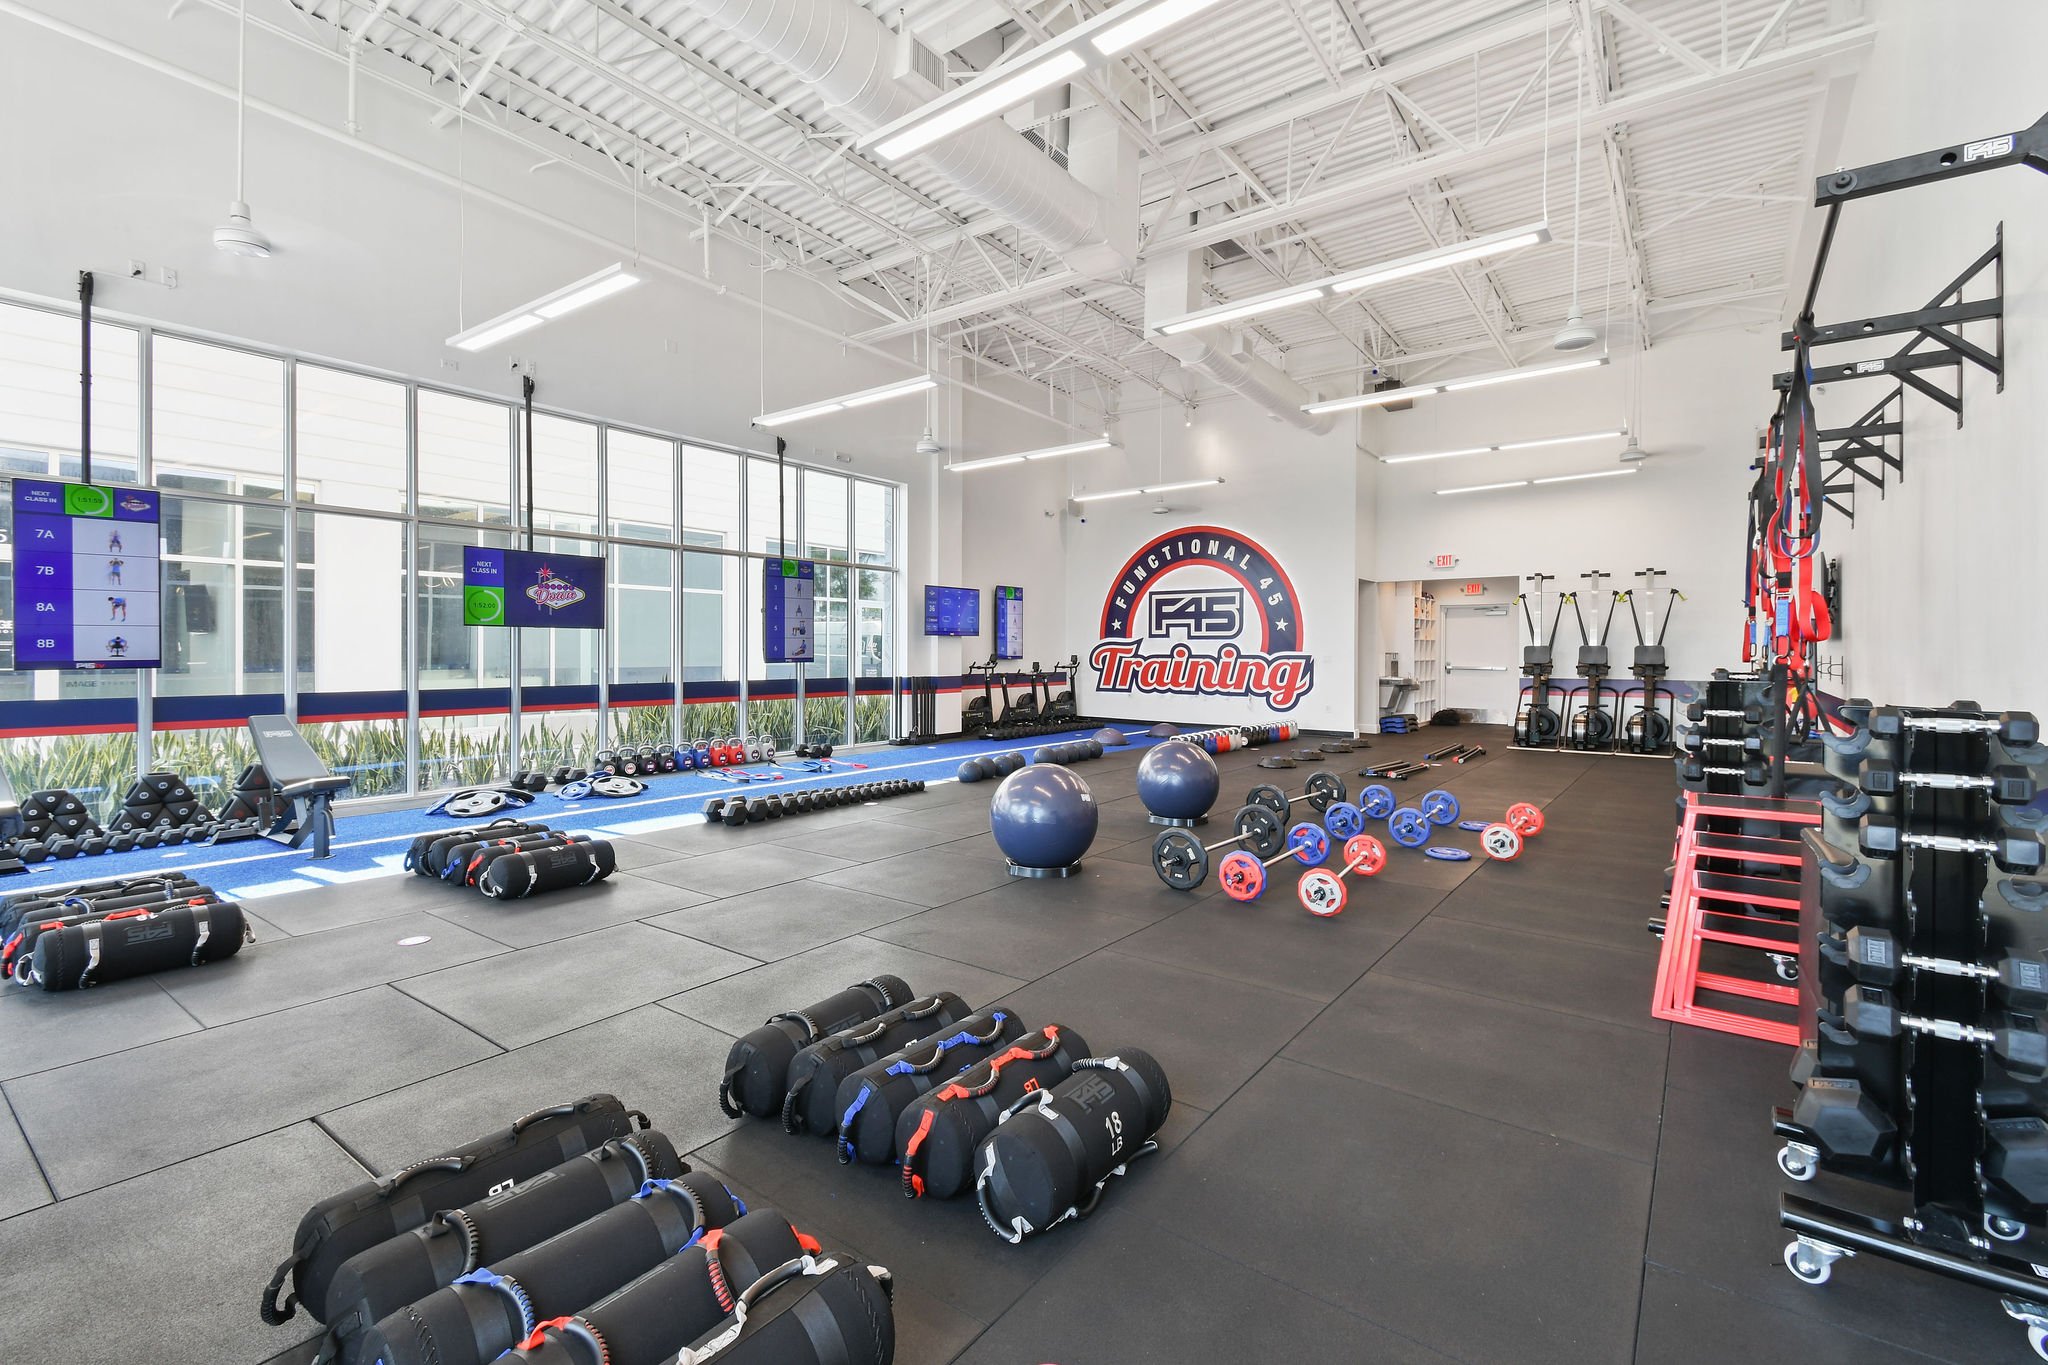 &lt;strong&gt;F45 TRAINING&lt;/strong&gt;&lt;a&gt;SEE PROJECT →&lt;/a&gt;